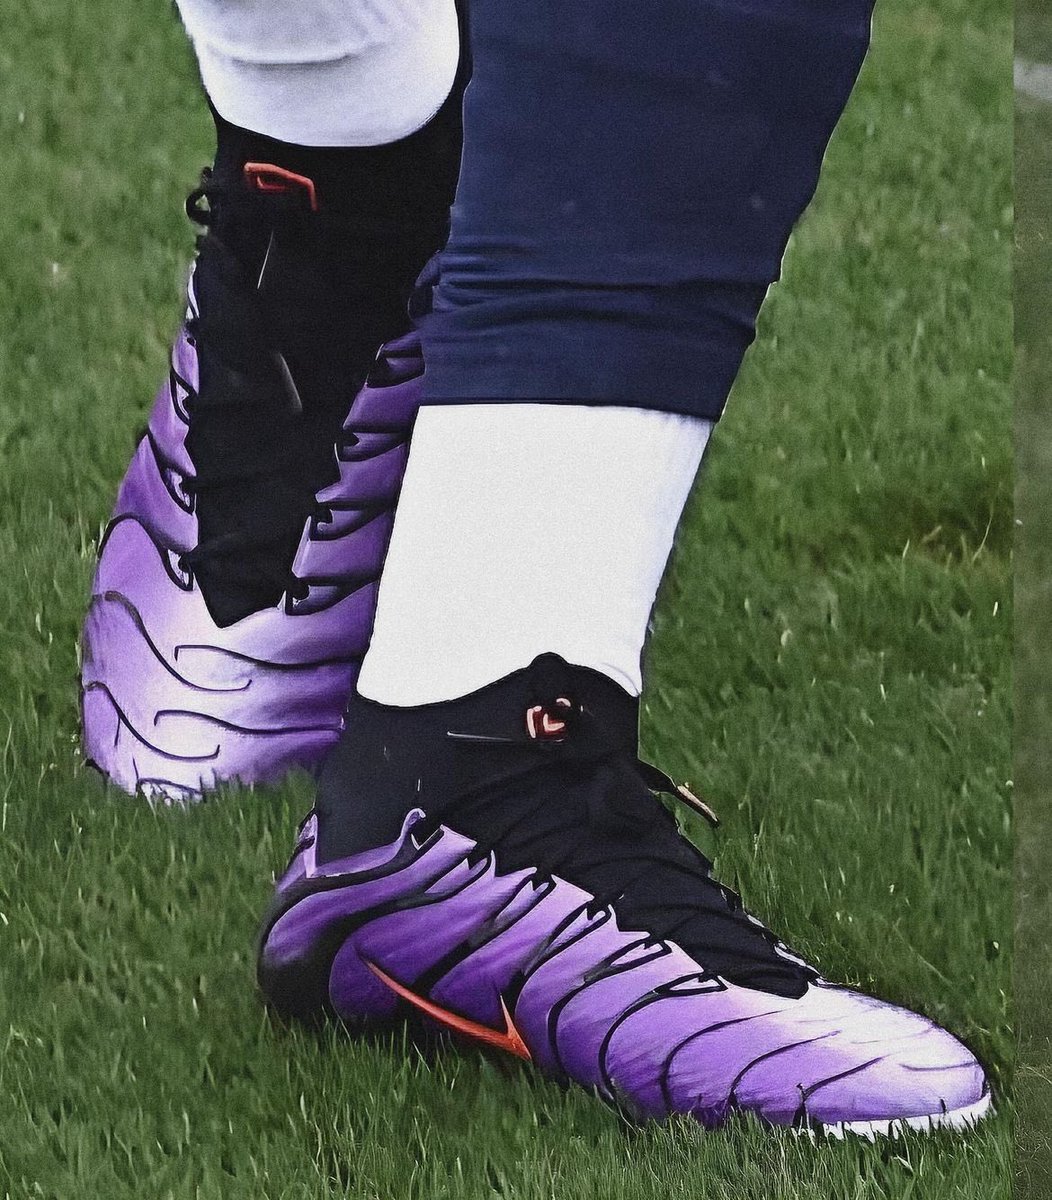 Kylian Mbappe rocking the new Nike Mercural boots inspired by Air Max TNs in training today 🥶